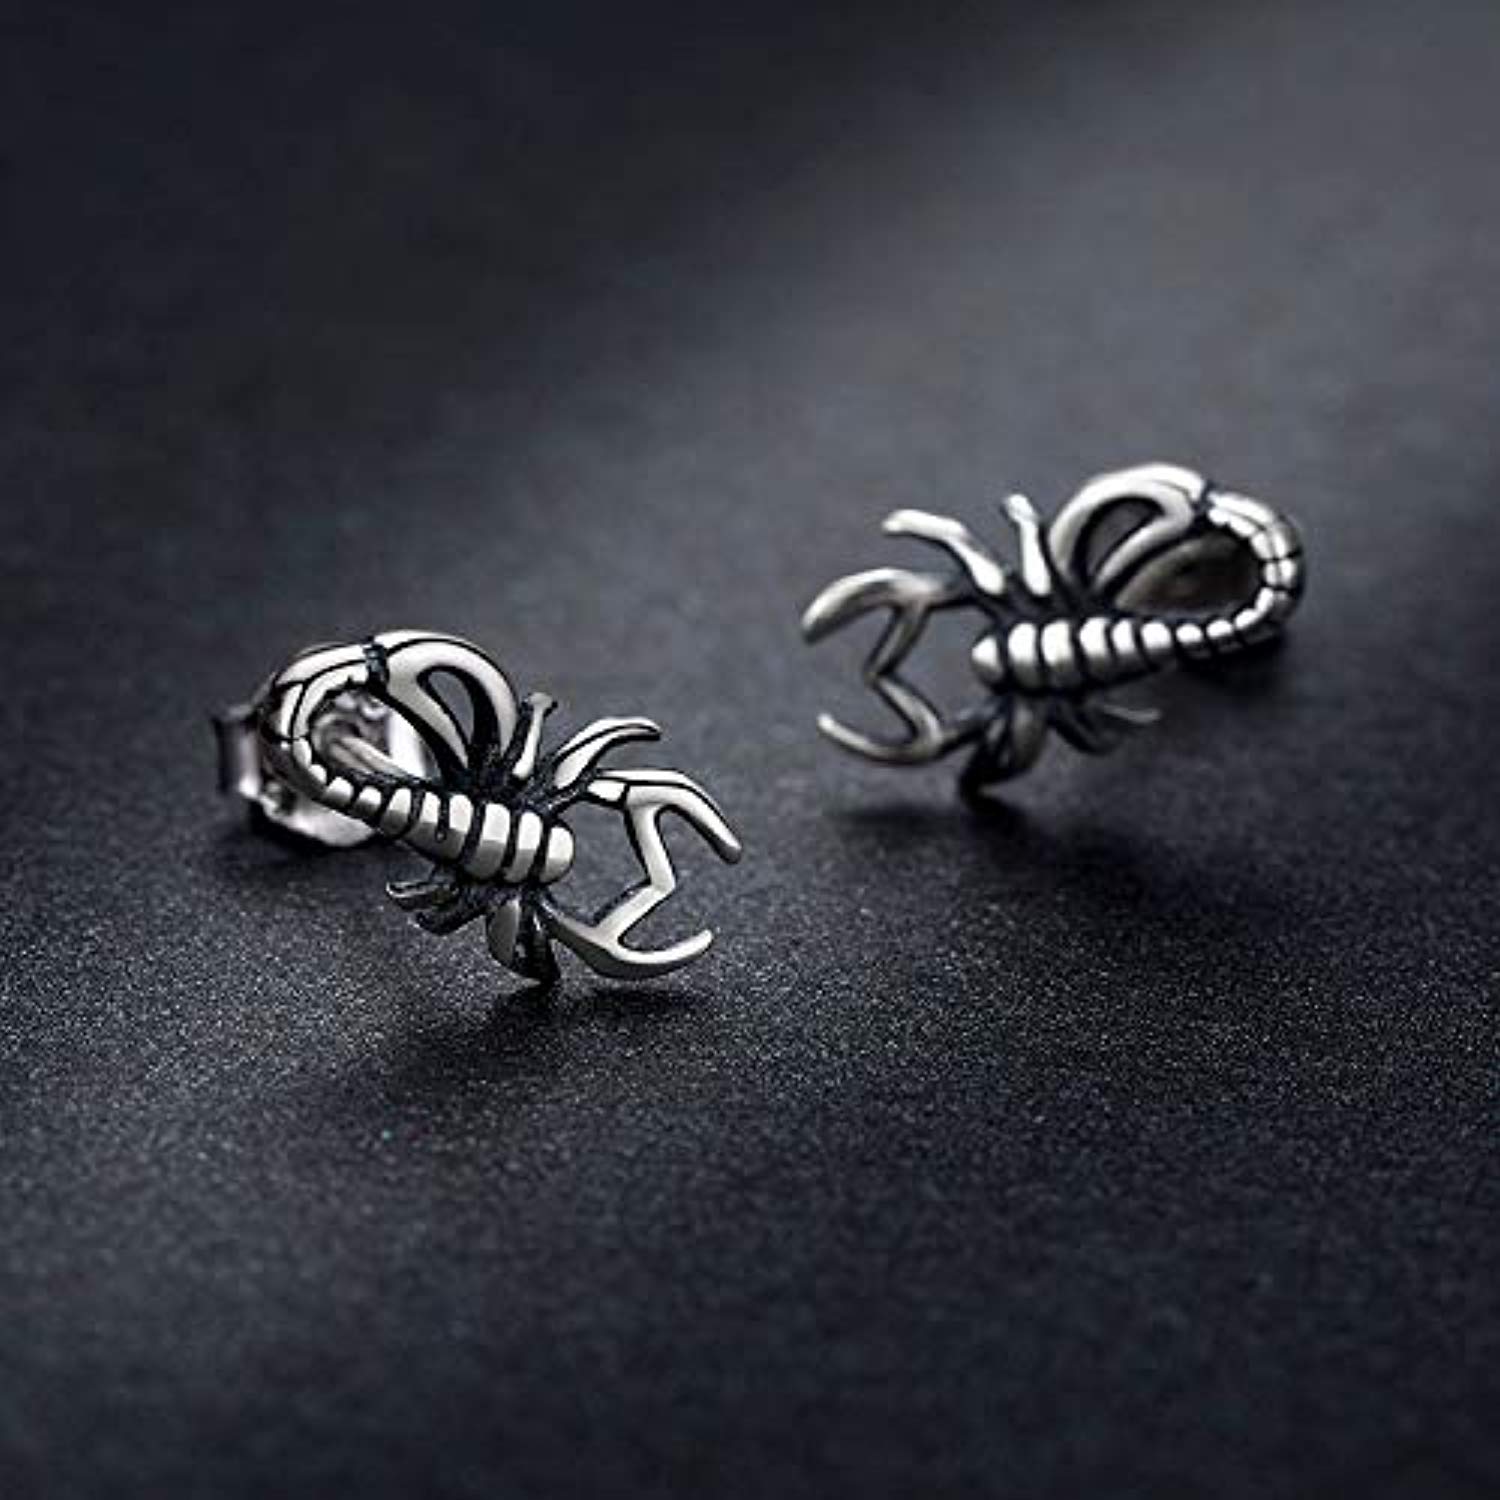 Amazon.com: Scorpion Punk 925 Sterling Silver Earrings for Women Girls Men  Stud CZ Cool Teens Small Scorpio Personalized Cute Dainty Friendship Gifts  18K Gold Finish Cartilage Hypoallergenic Gothic Animal Jewelry: Clothing,  Shoes